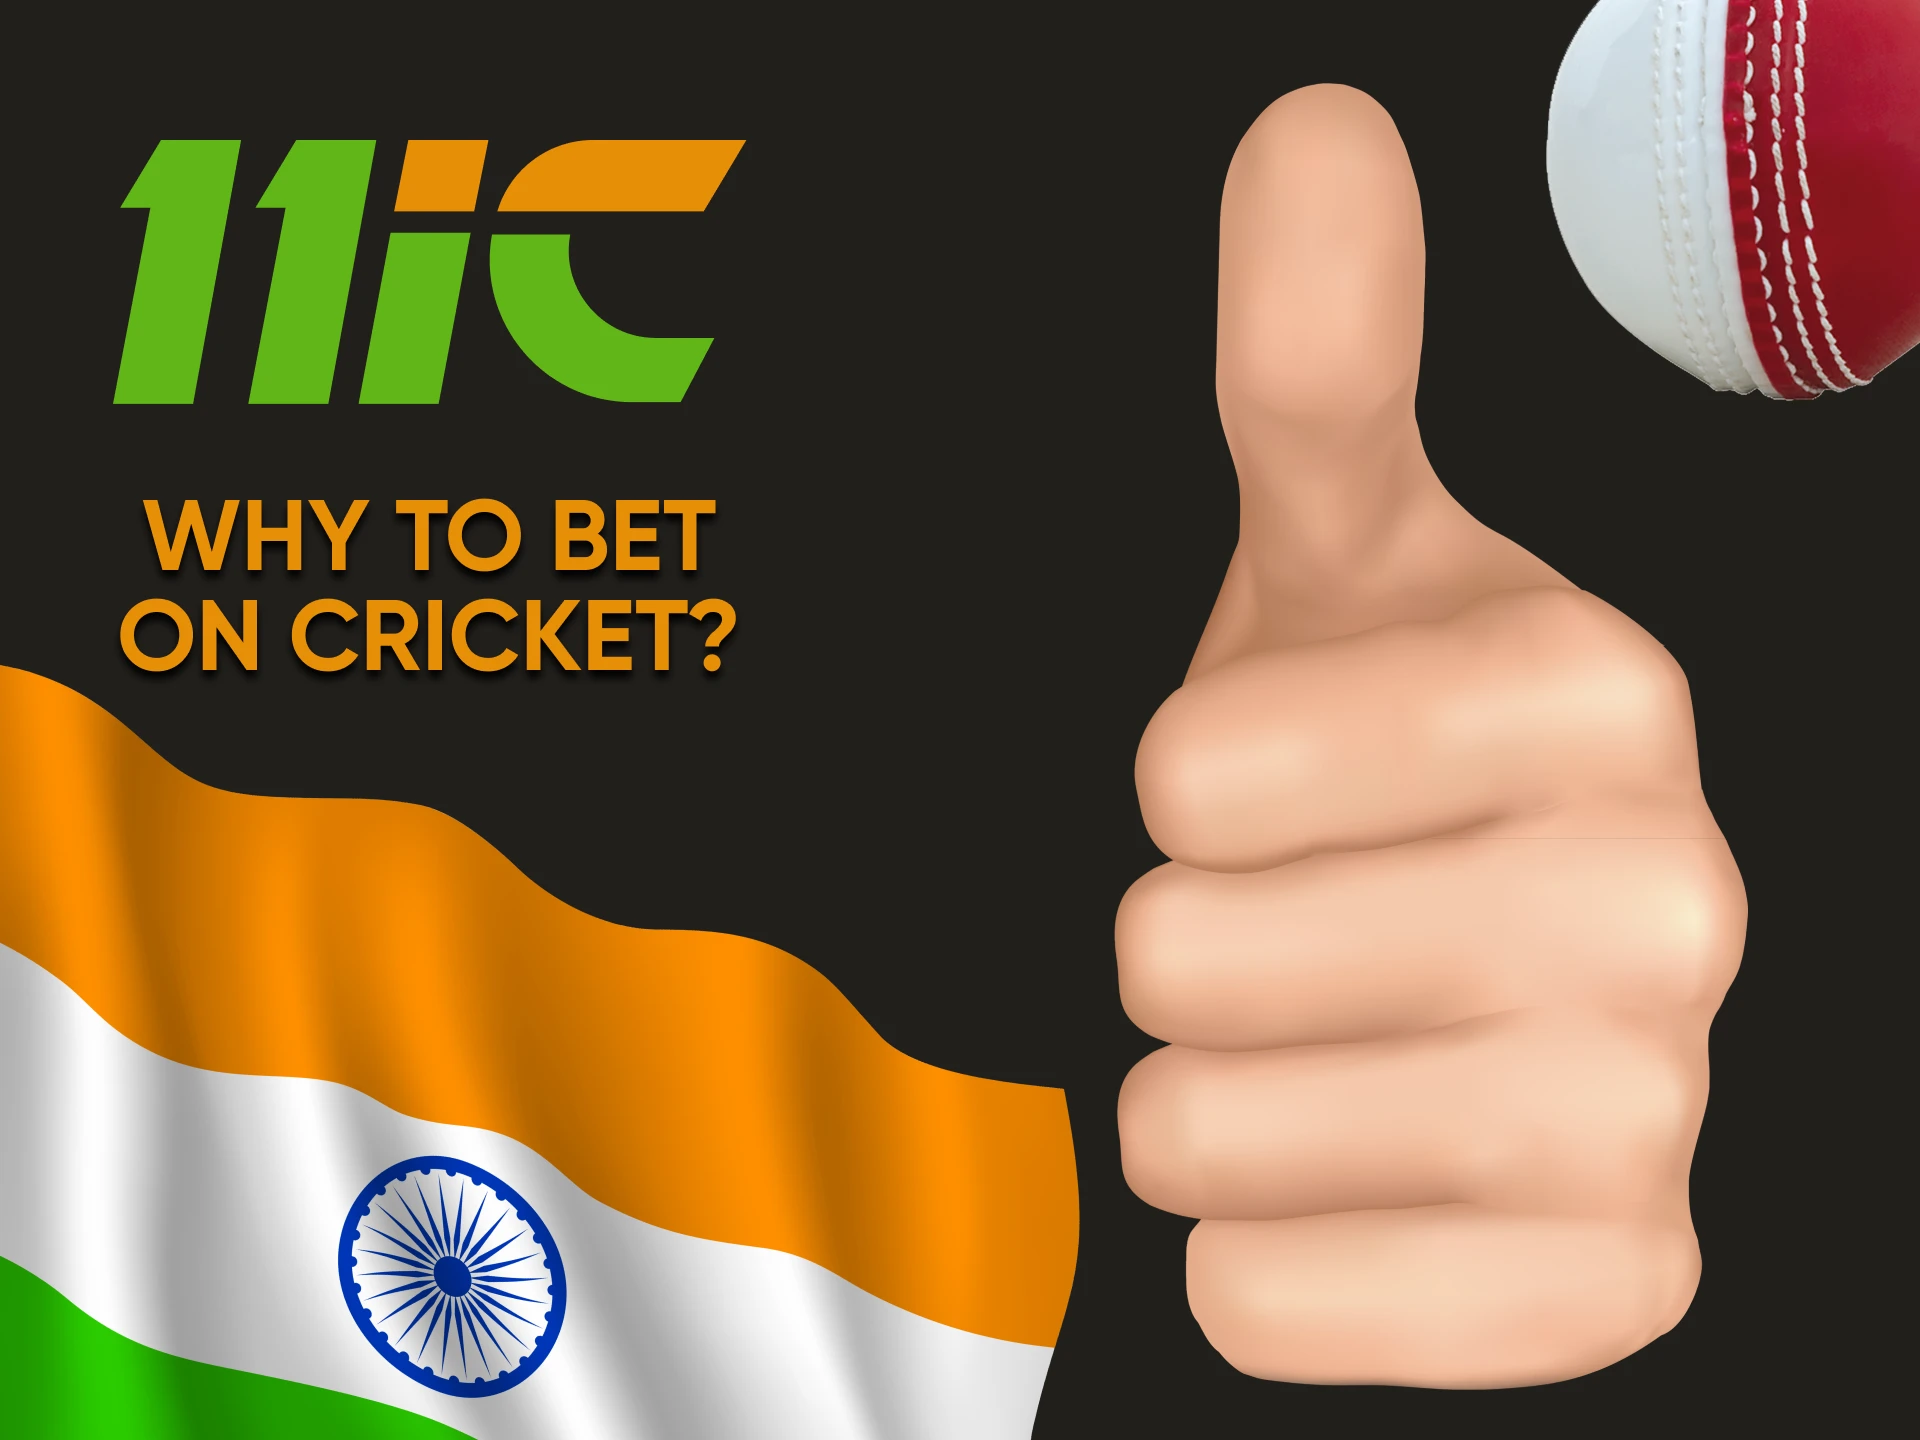 We will tell you why you choose 11ic for cricket betting.